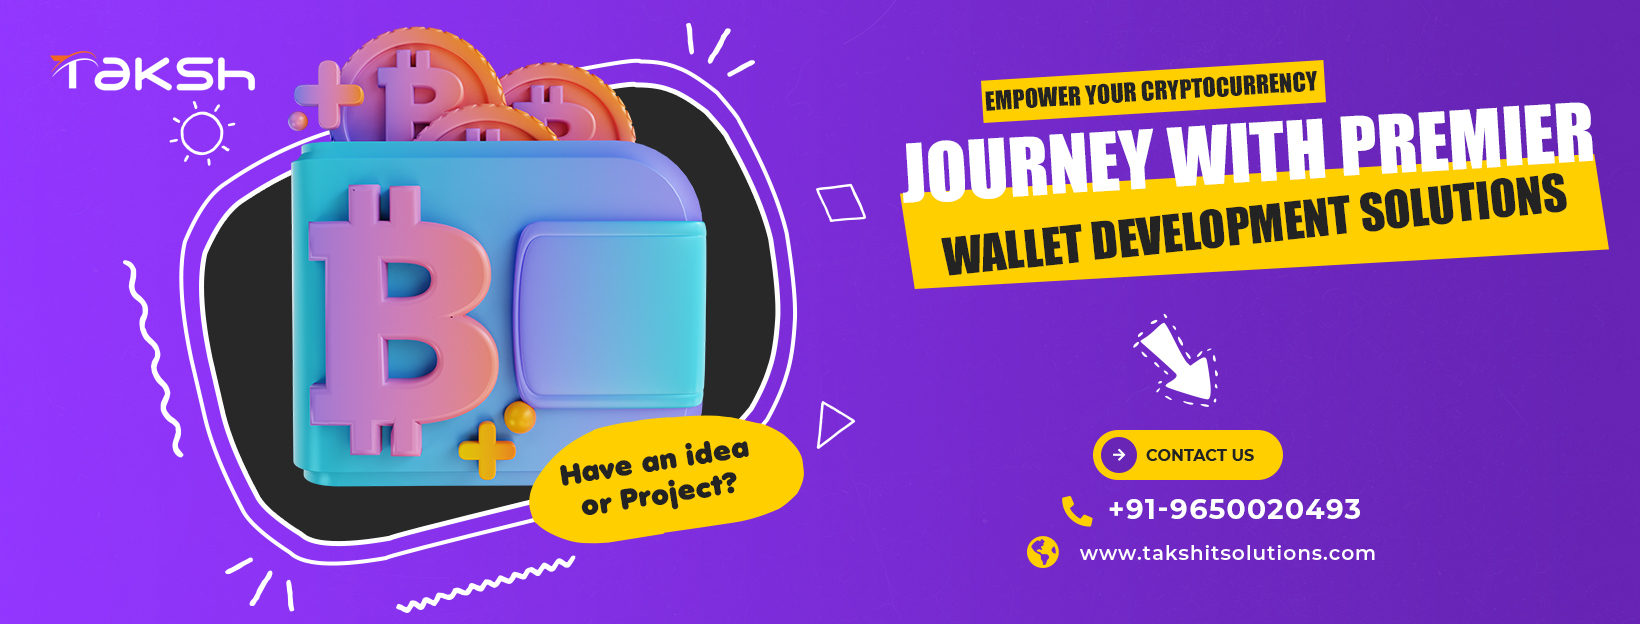 Empower Your Cryptocurrency Journey with Premier Wallet Development Solutions